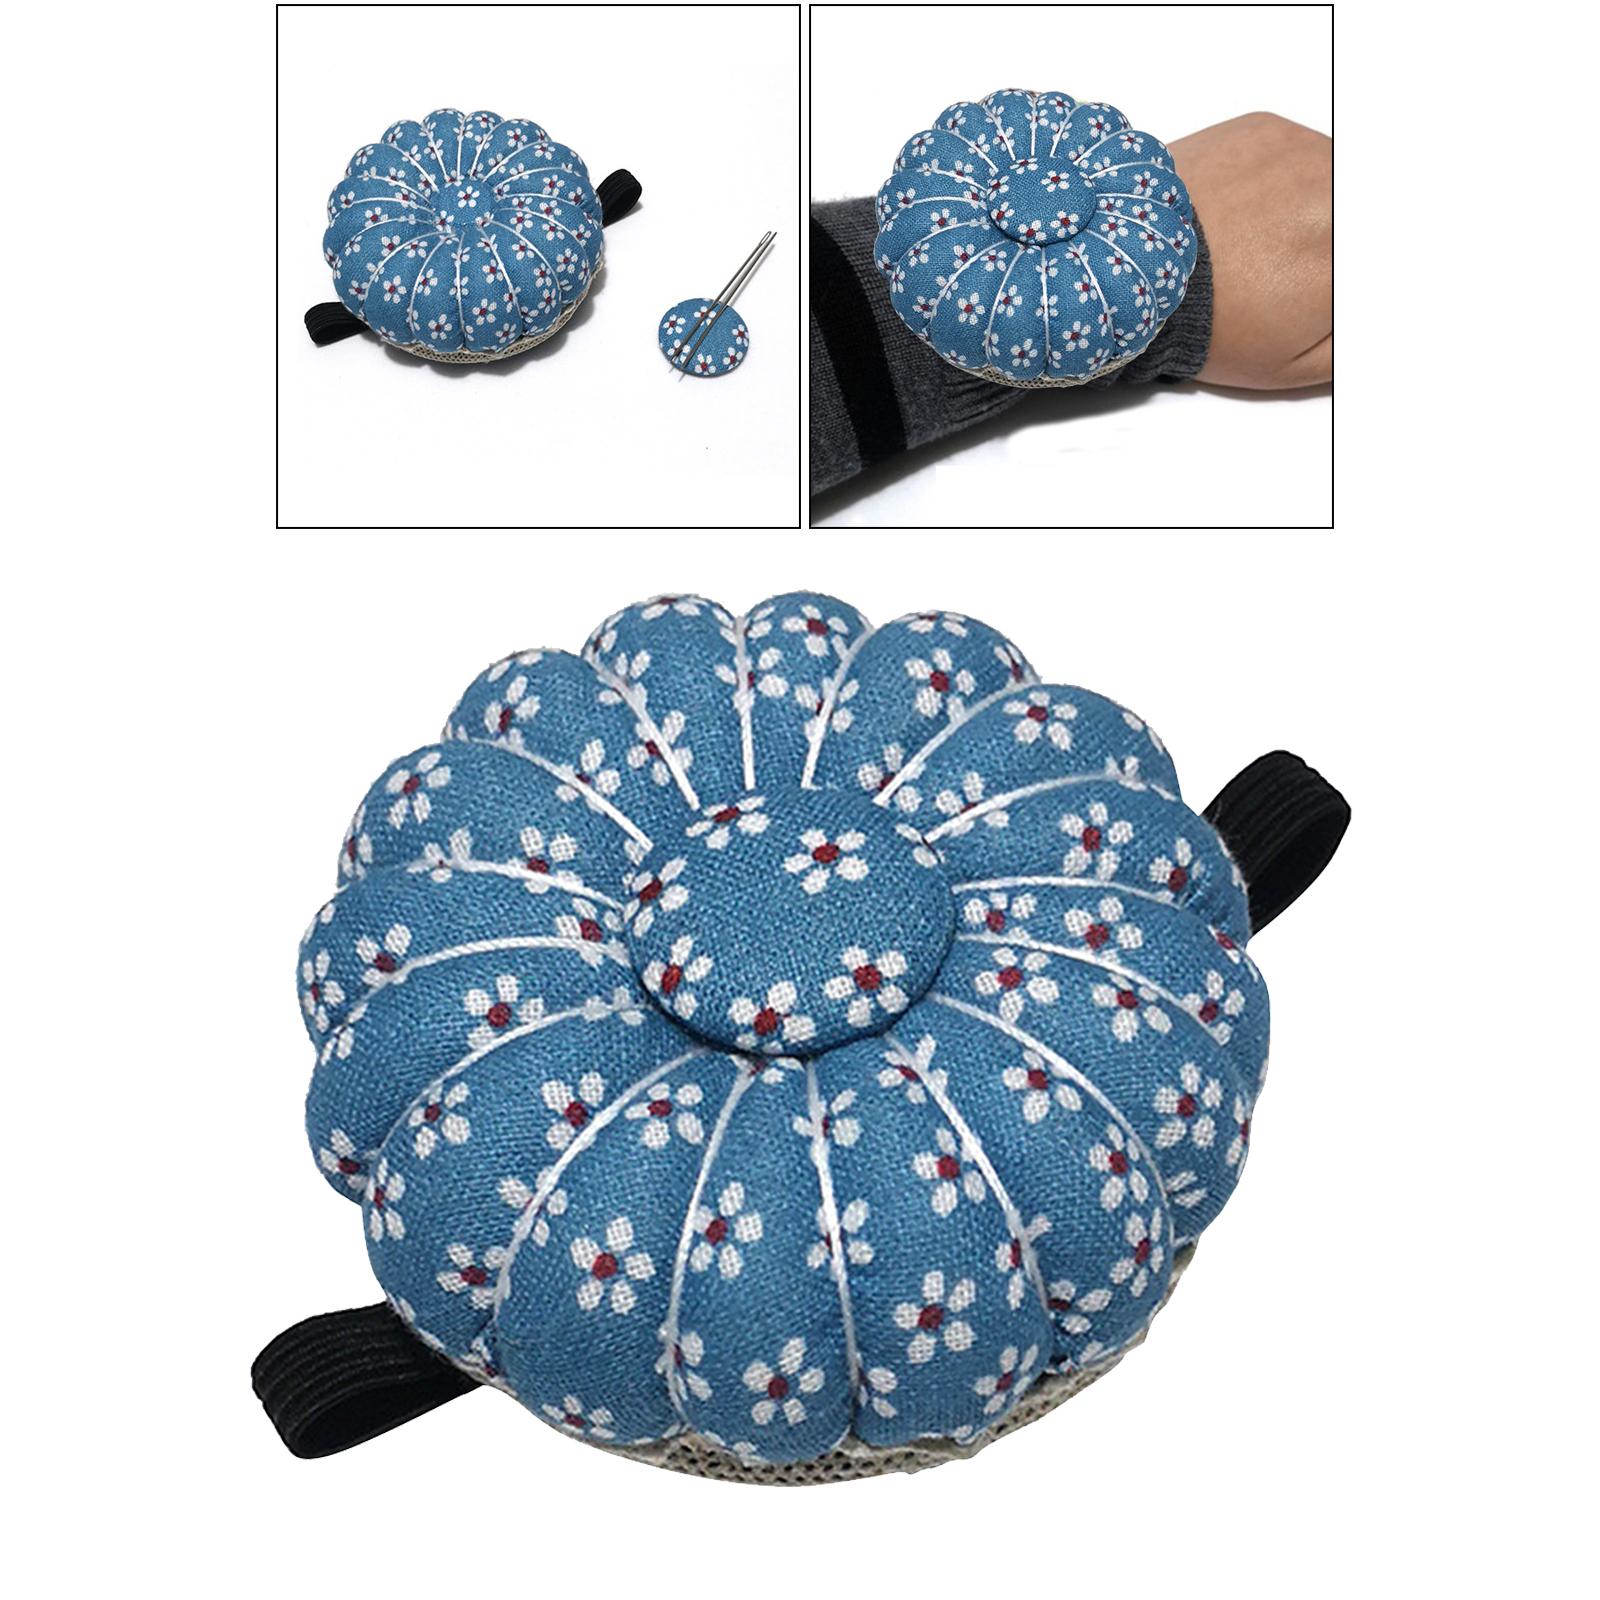 Pin Cushions - Wrist Pin Cushion for Sewing Pincushion with Soft Cotton  Fabric, Pin Patchwork Holder Kunst und Skulpturen & Sewing Blue